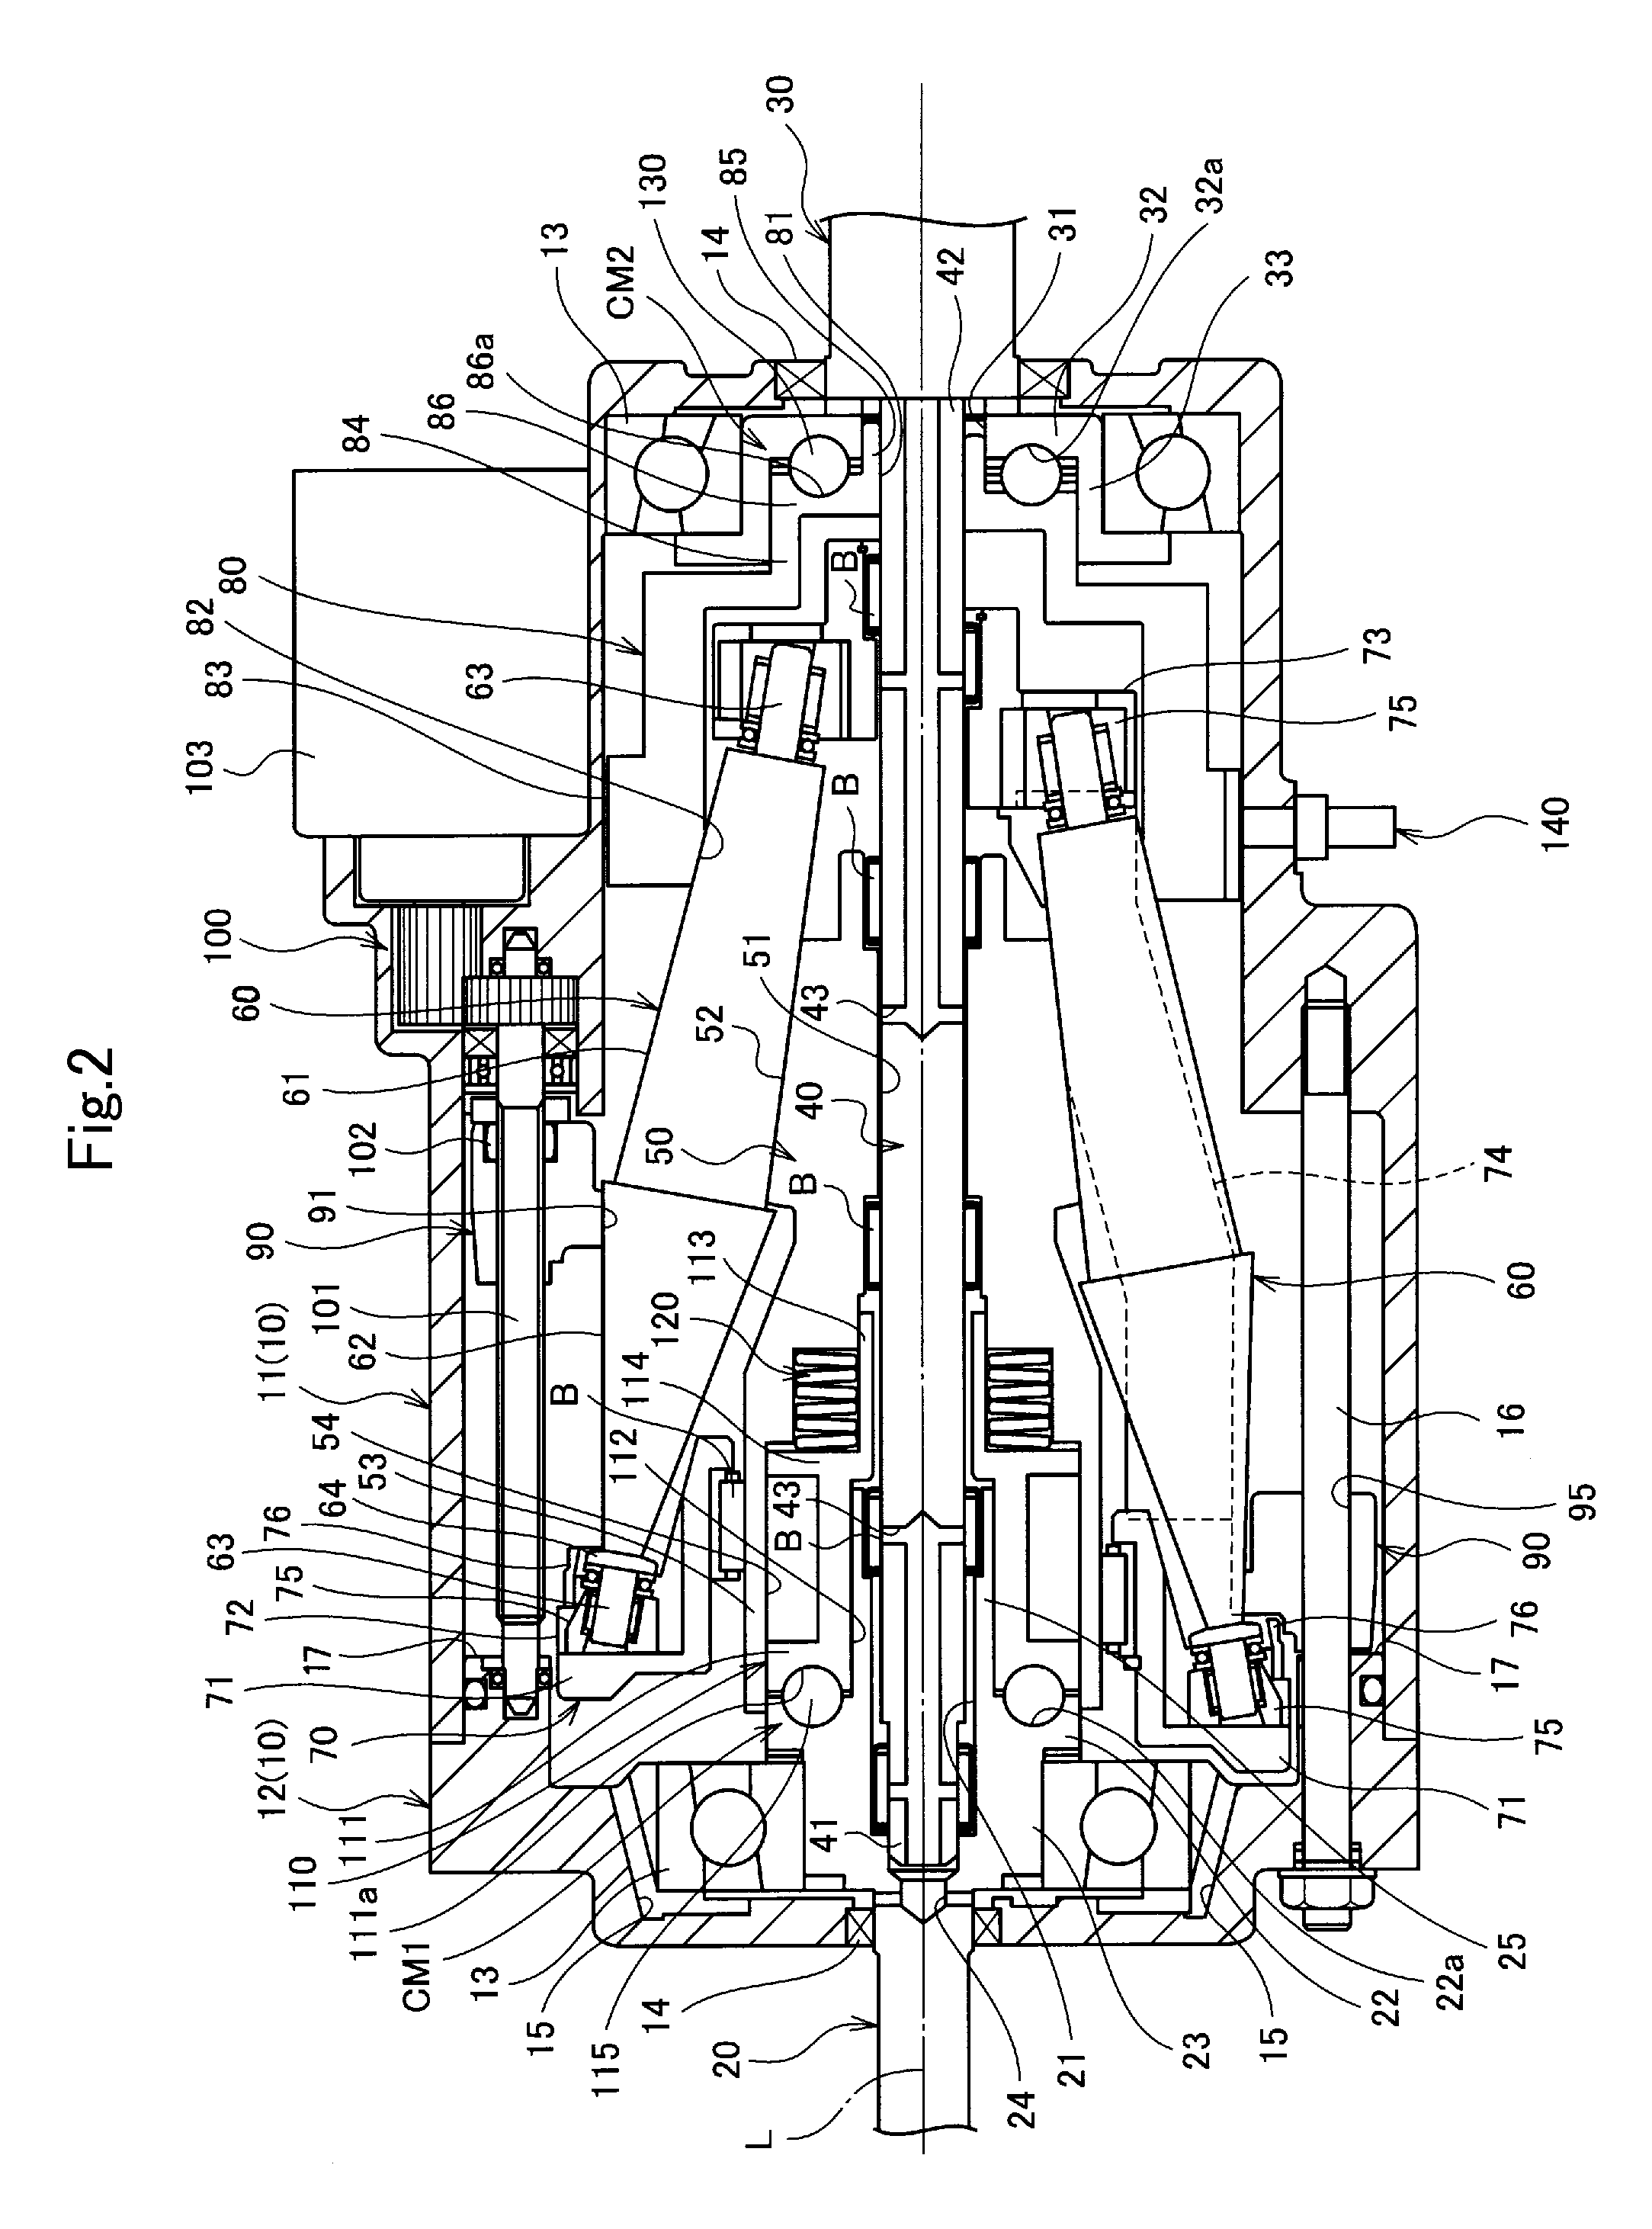 Continuously variable transmission device